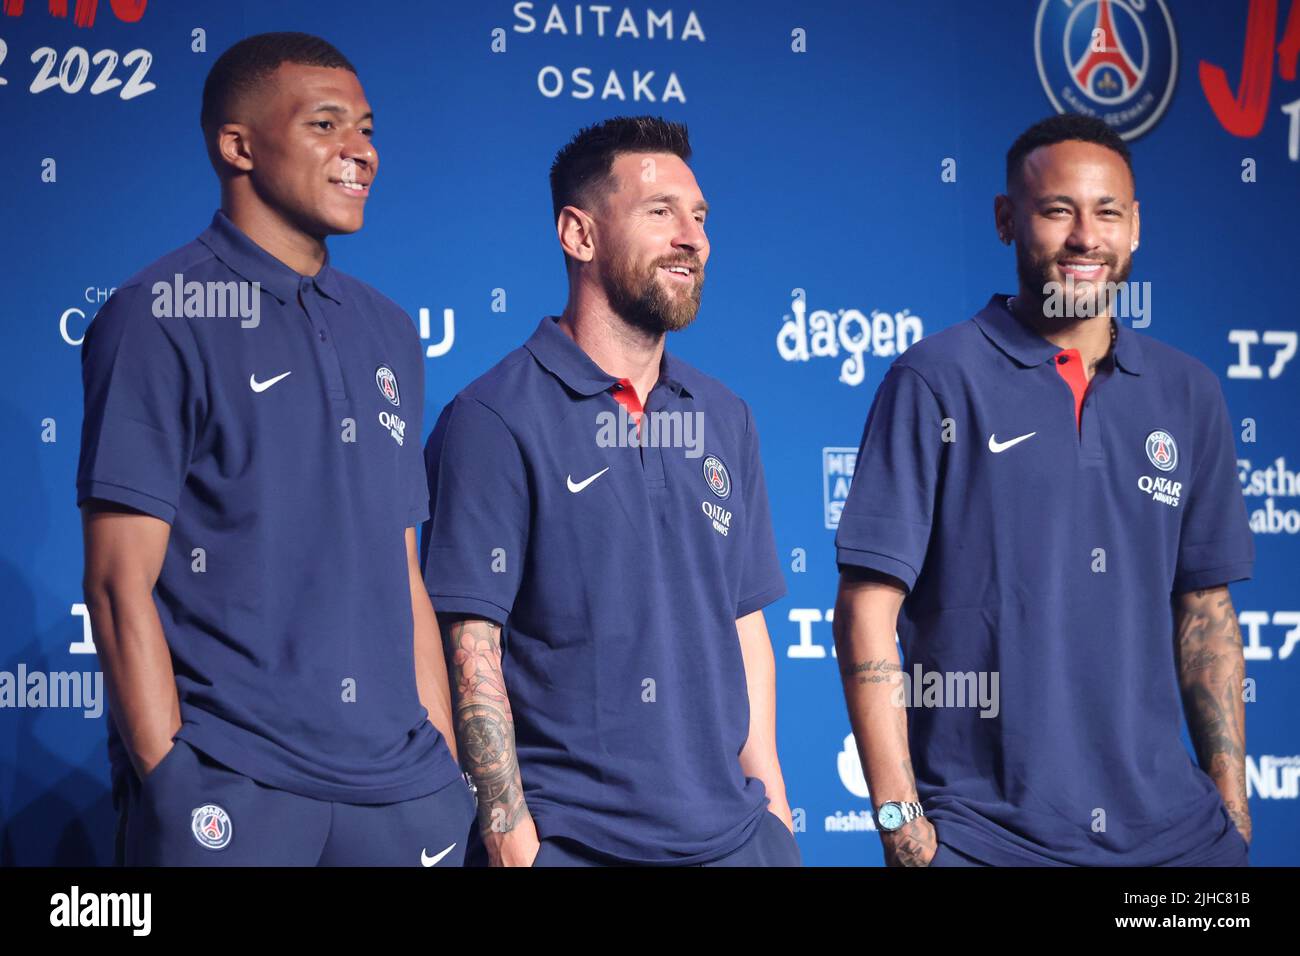 Tokyo, Japan. 17th July, 2022. (L-R) French football club team Paris Saint-Germain star players Kylian Mbappe, Lionel Messi and Neymar Jr pose for photo at a press conference upon their arrival in Tokyo on Sunday, July 17, 2022. Paris Saint-Germain will have Japanese club teams Kawasaki Frontale, Urawa Reds and Gamba Osaka for their Japan tour. Credit: Yoshio Tsunoda/AFLO/Alamy Live News Stock Photo